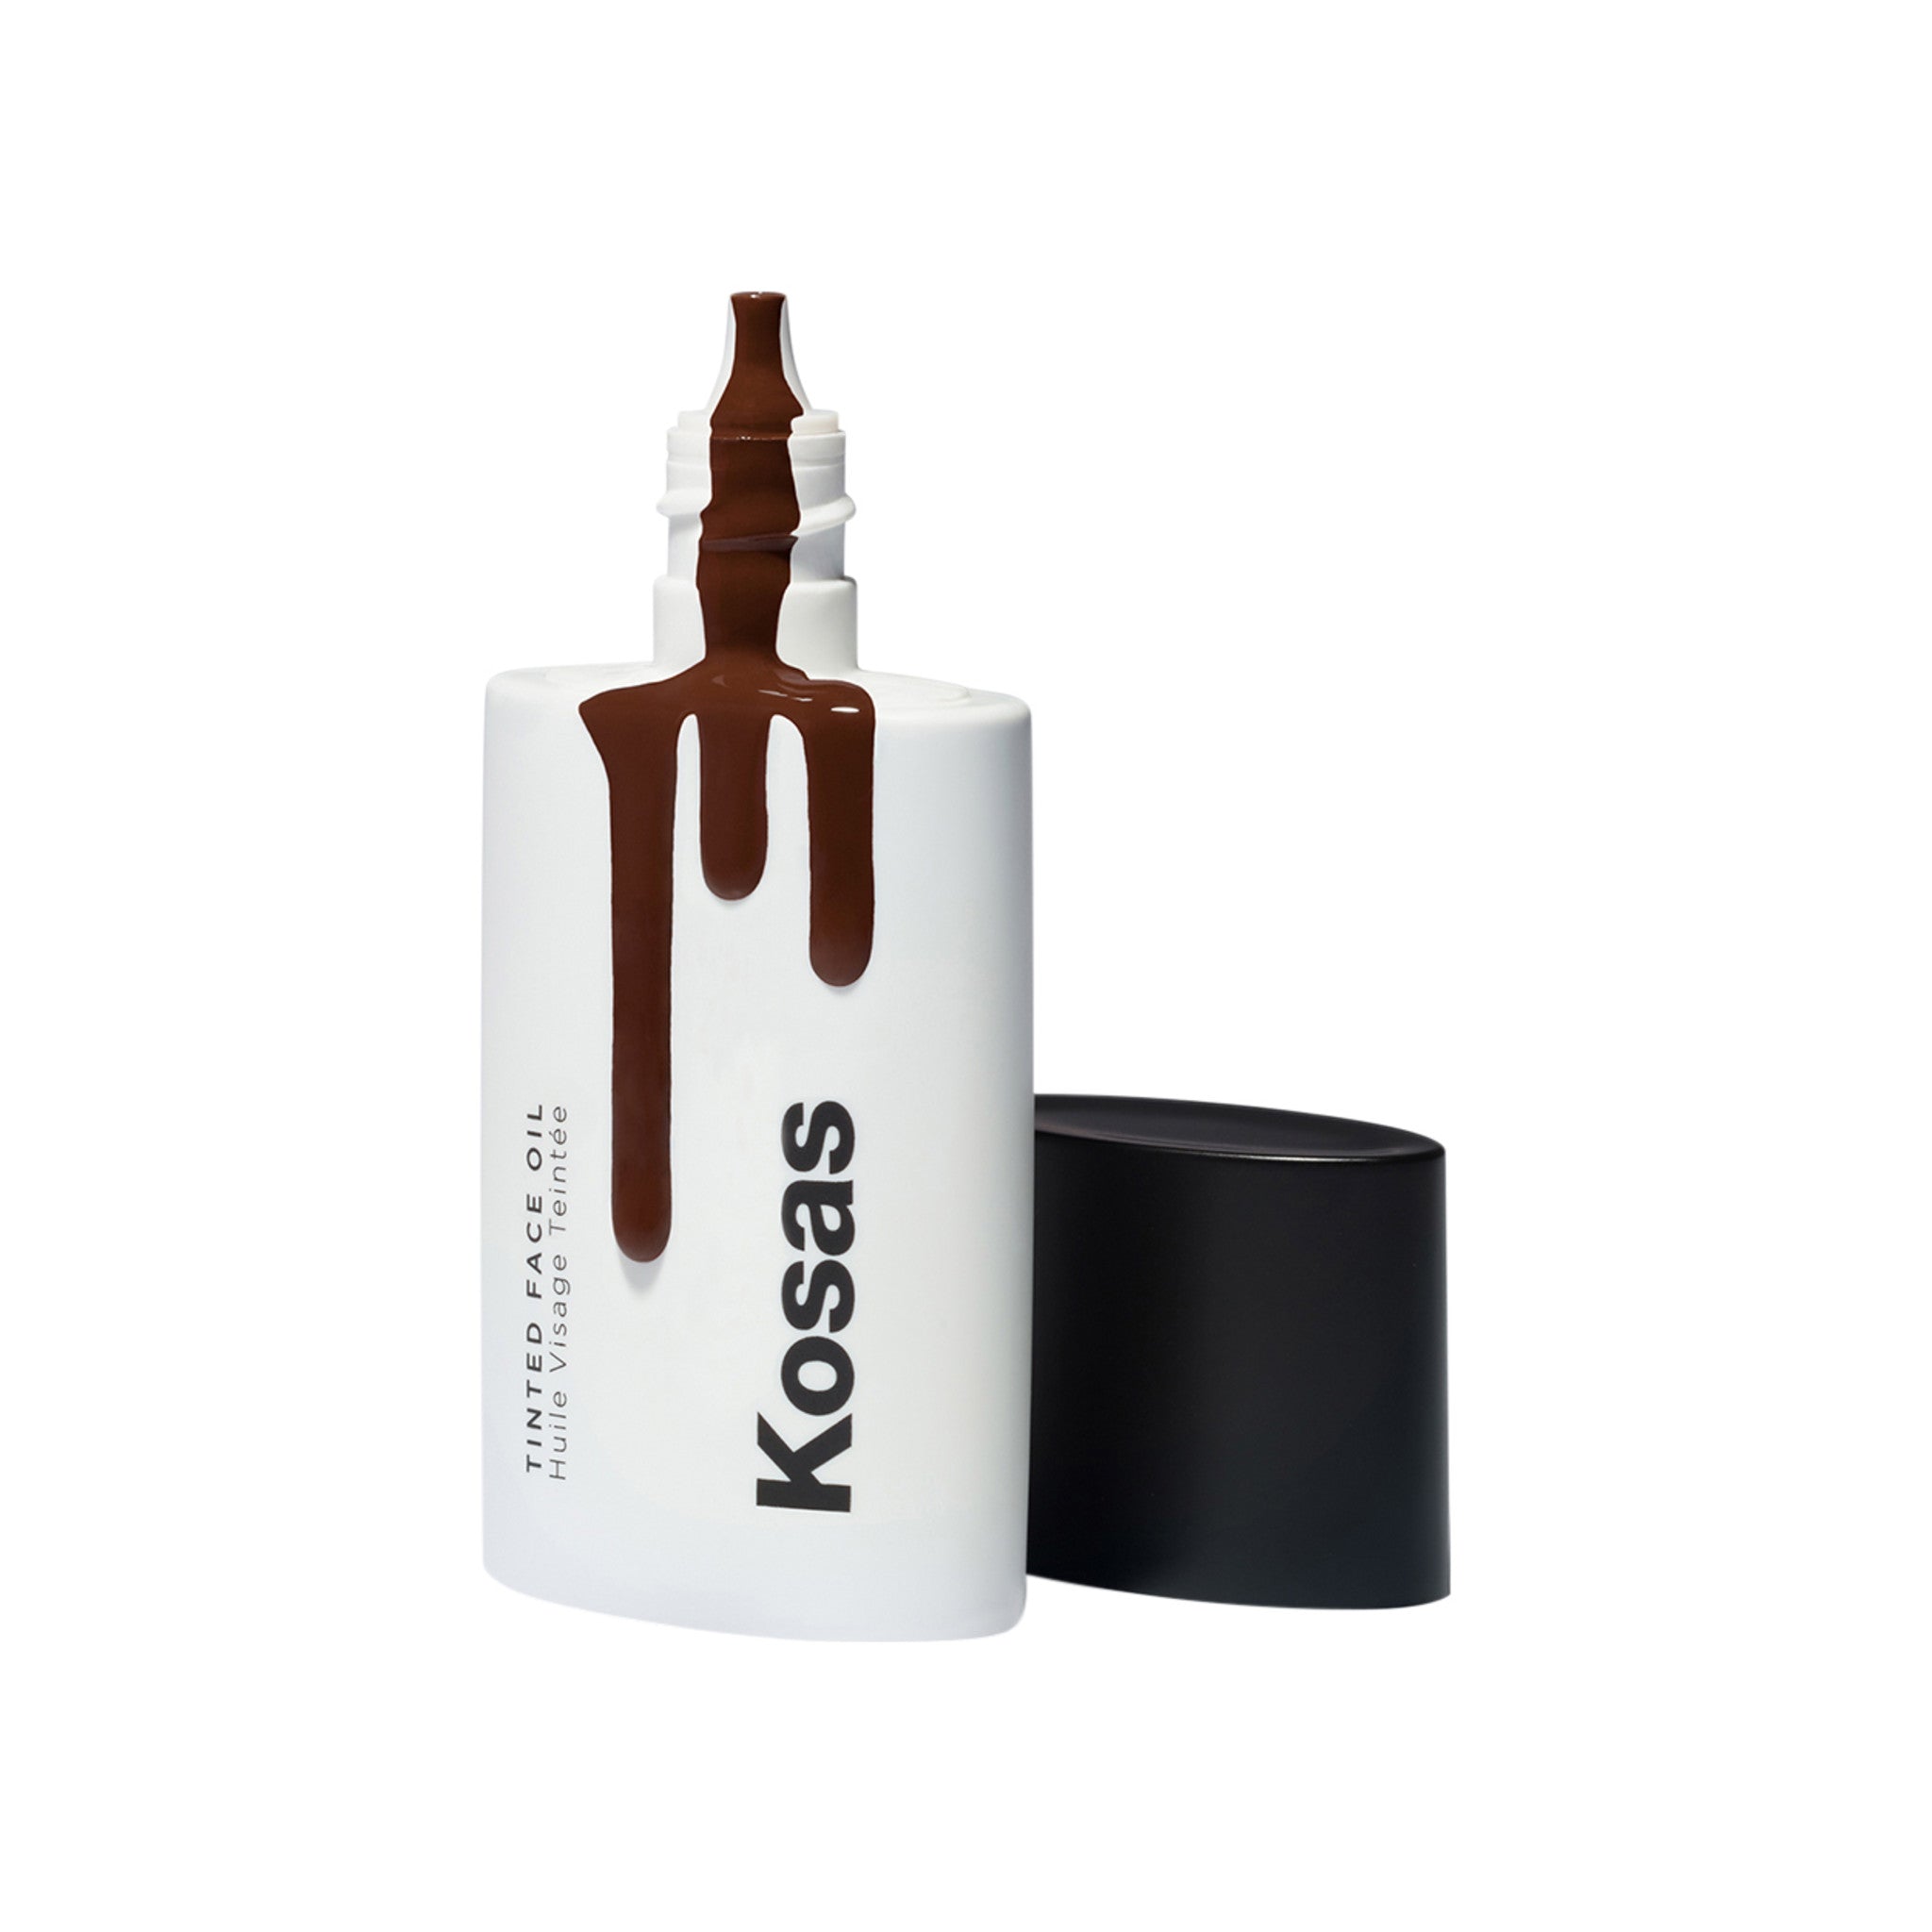 Kosas Tinted Face Oil Foundation Color/Shade variant: Tone 9.5 main image. This product is for deep neutral peach complexions